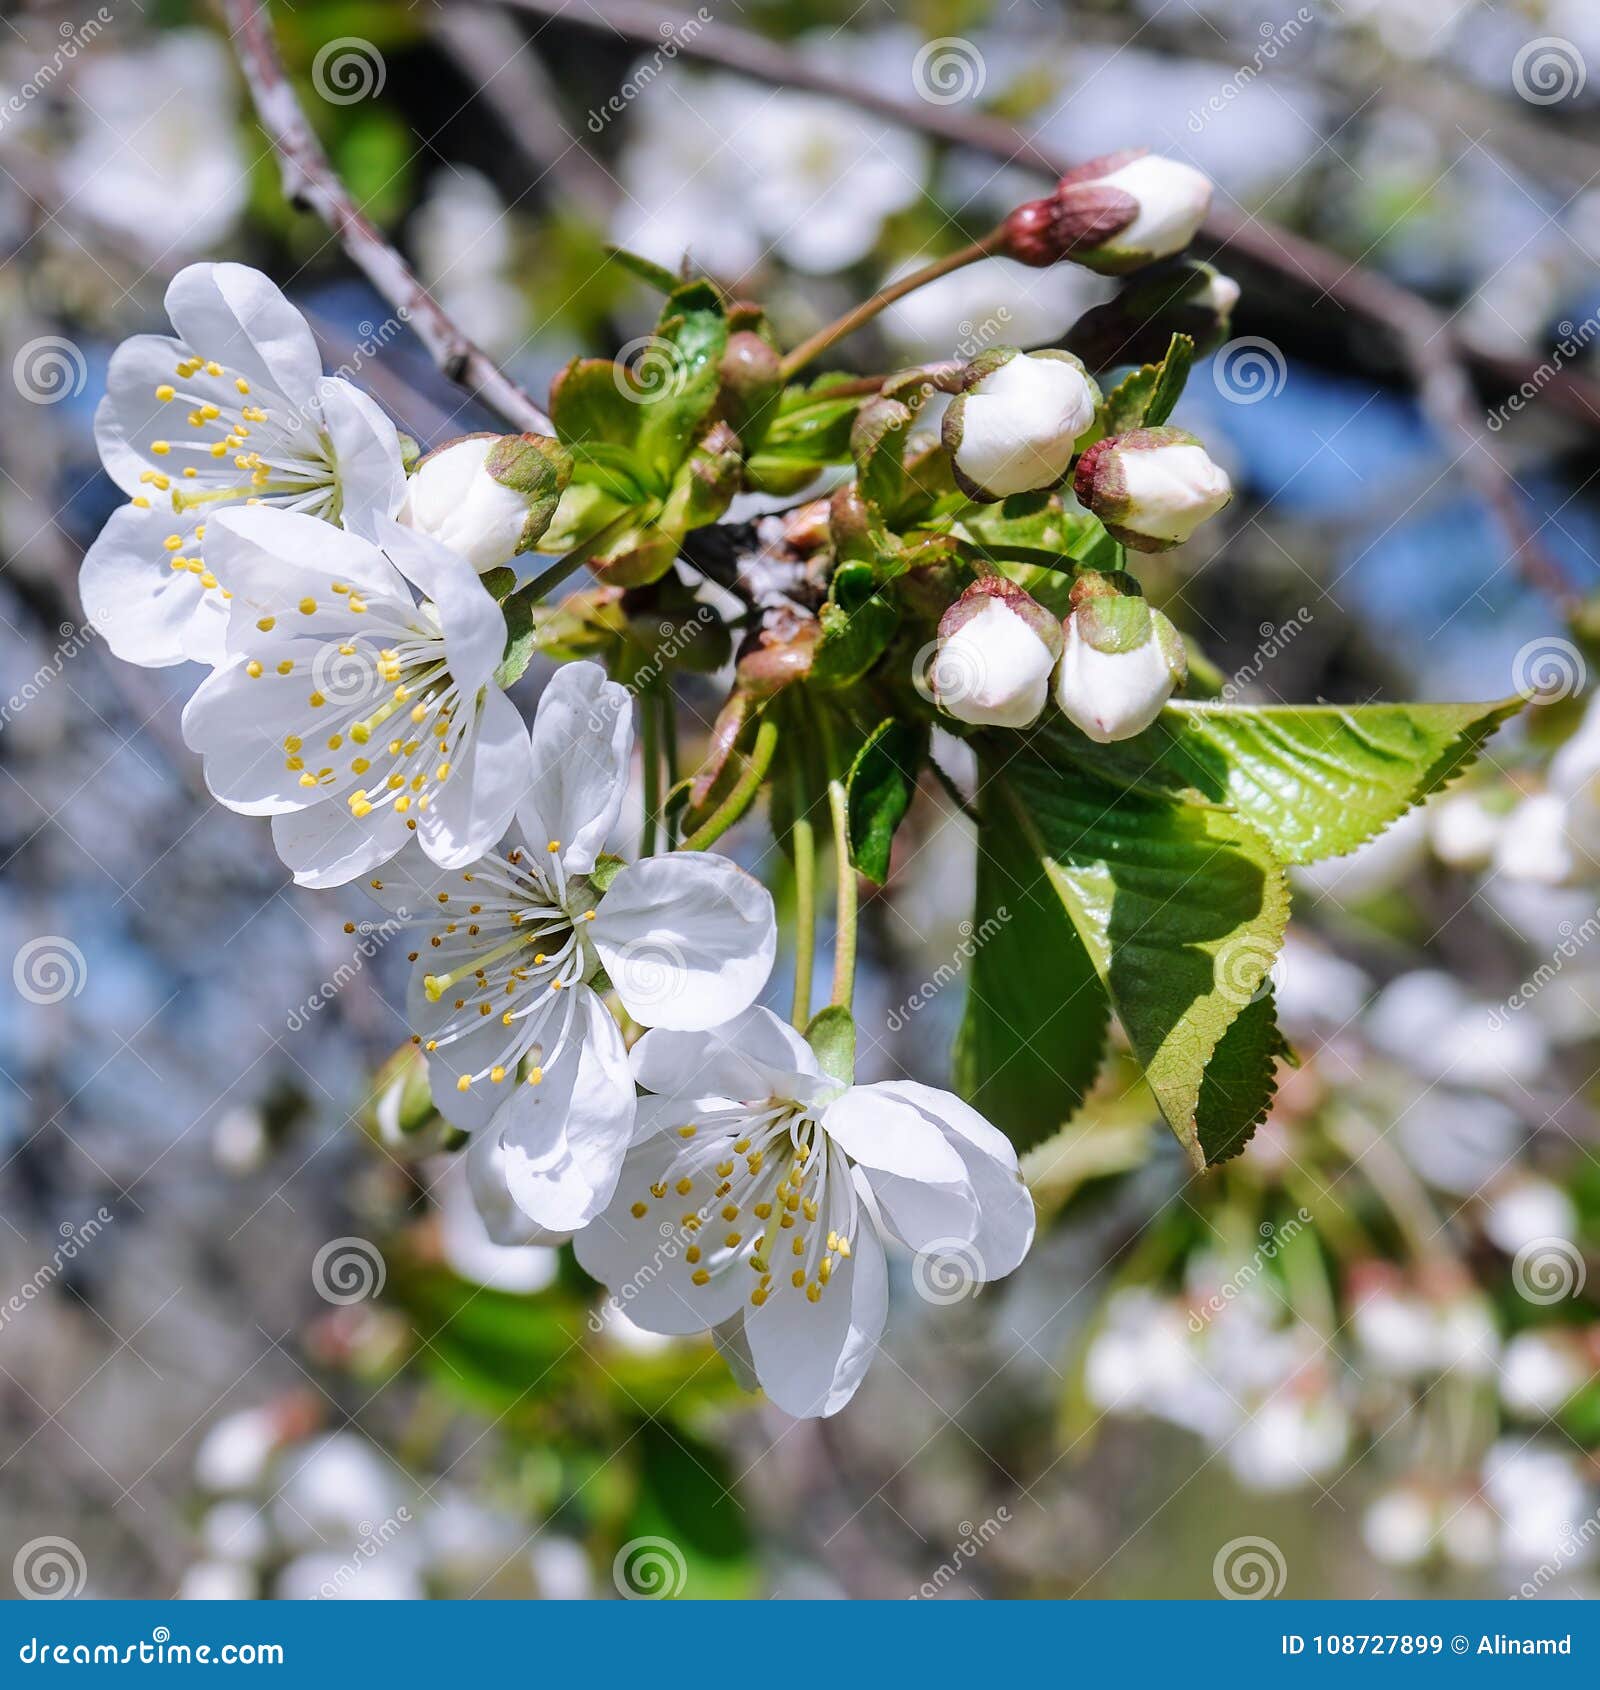 Spring Flowers. Beautifully Blossoming Tree Branch Stock Image - Image